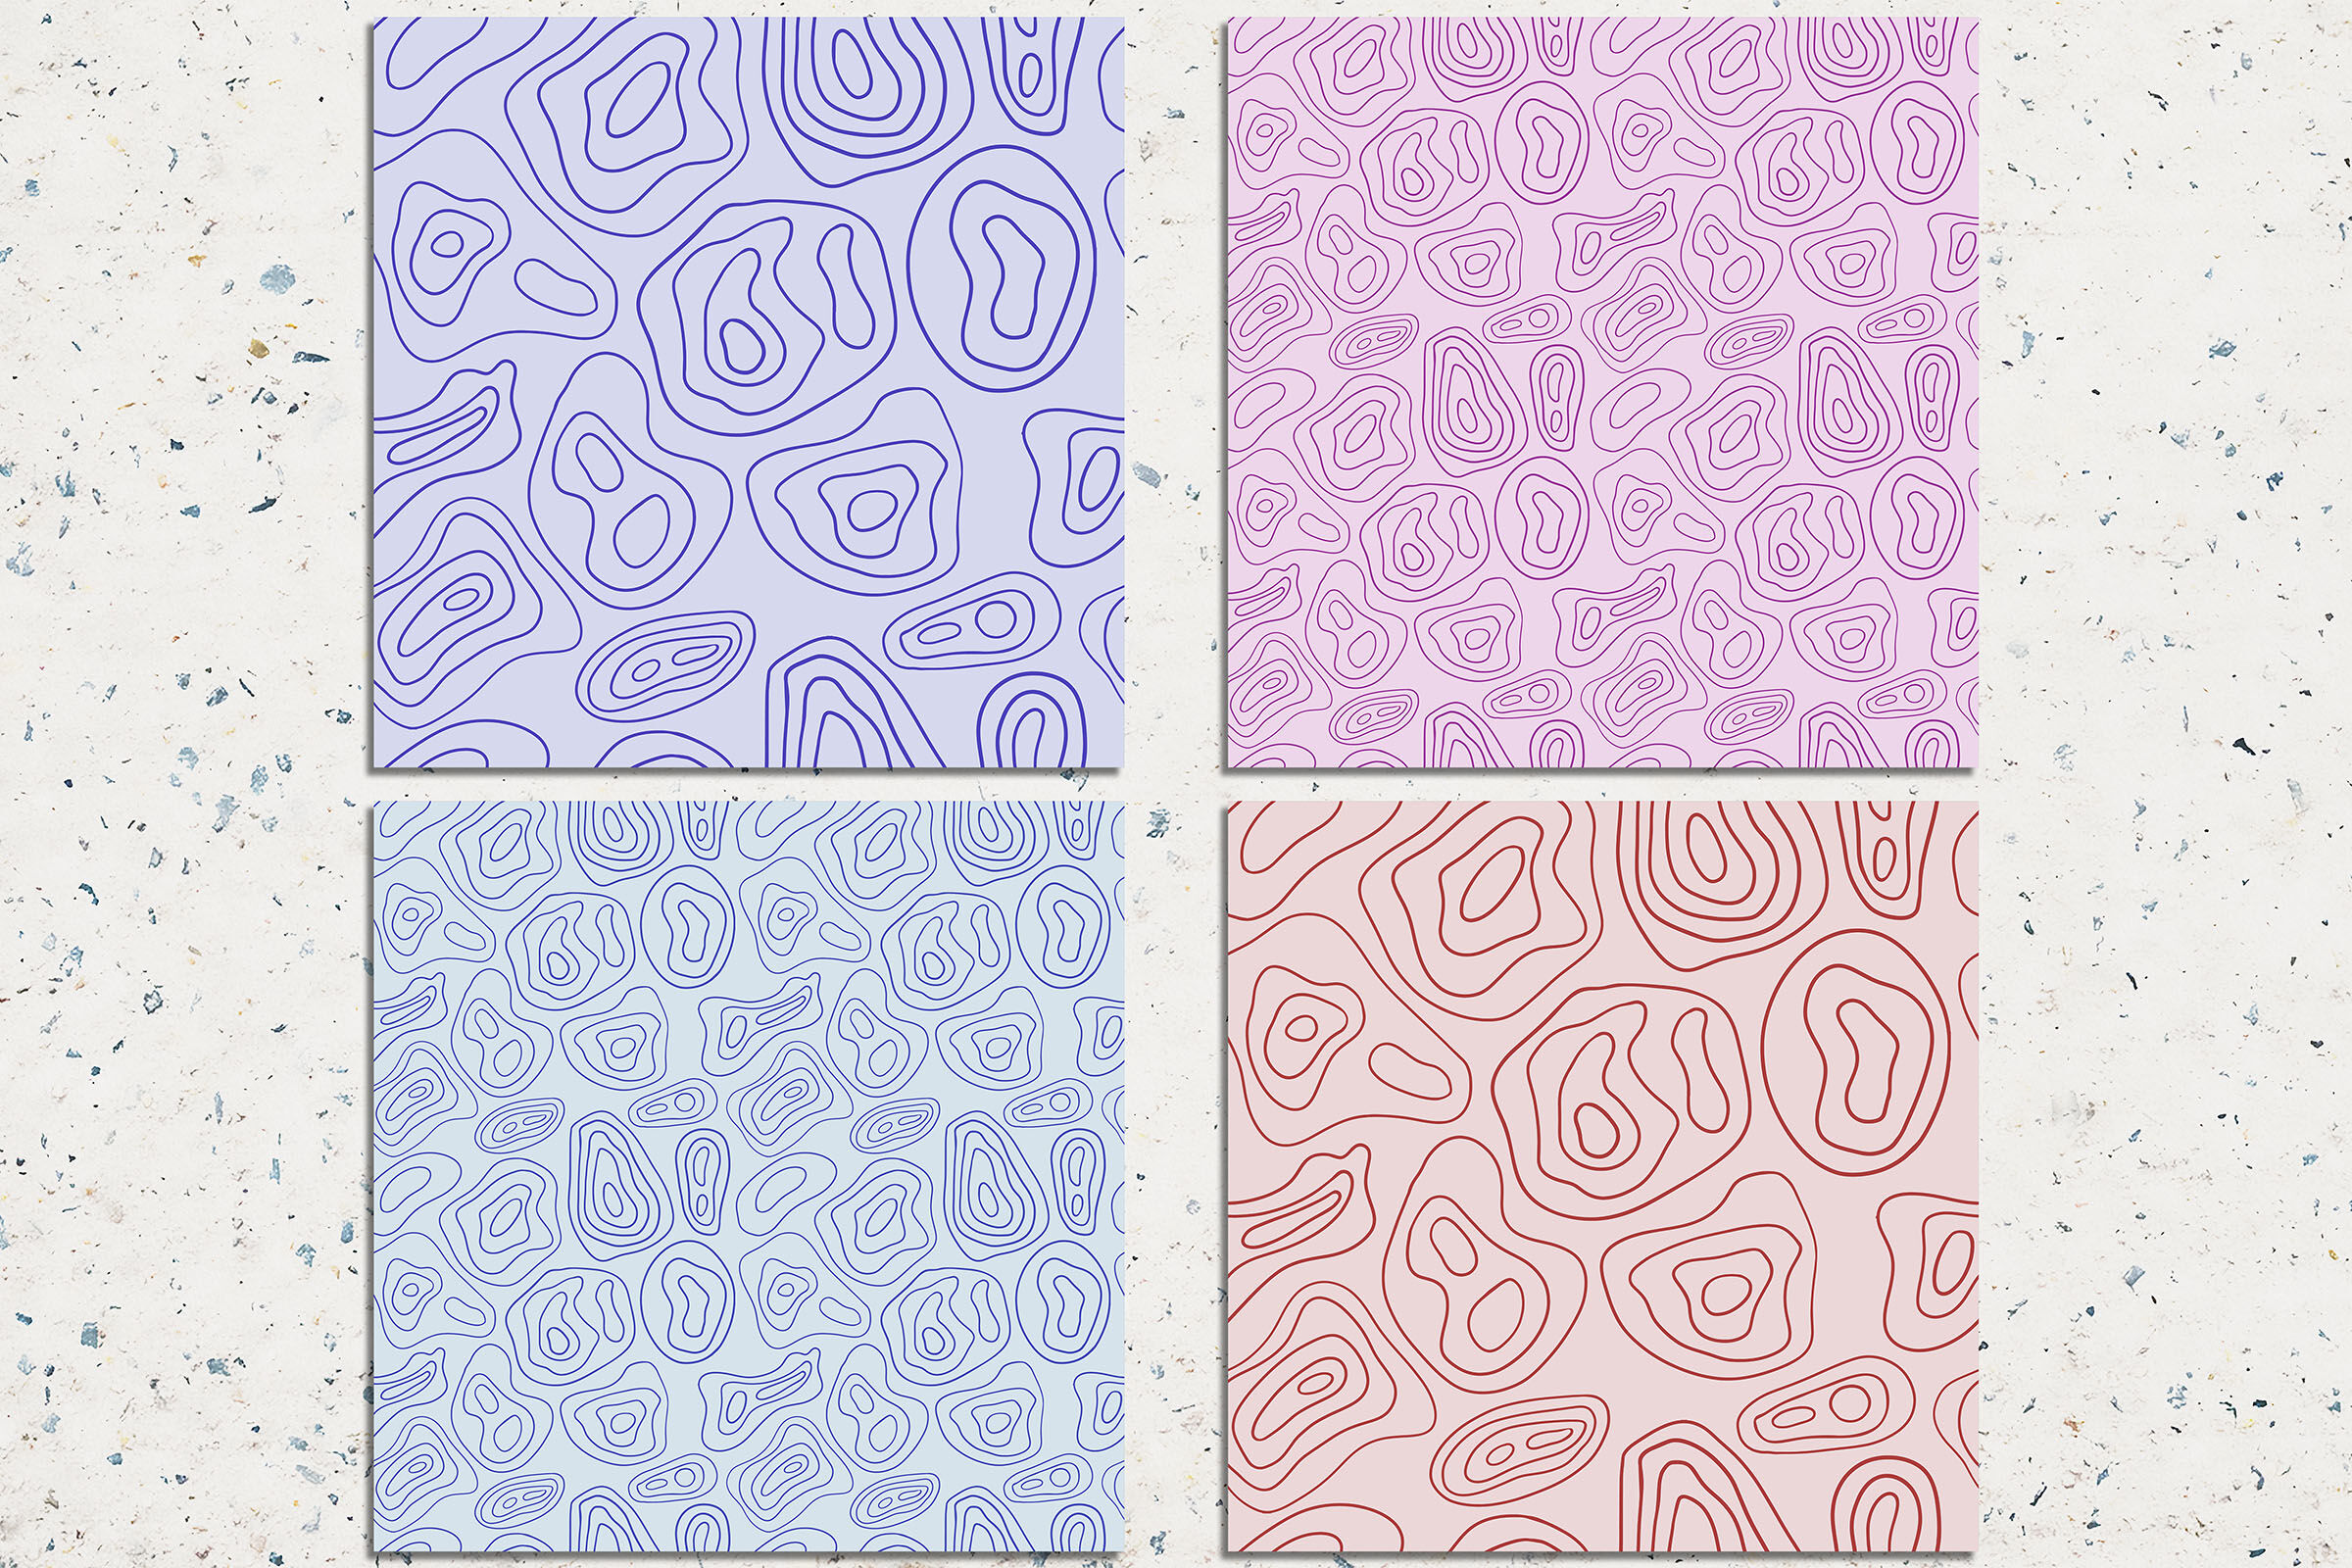 Topographic map seamless patterns By North Sea Studio